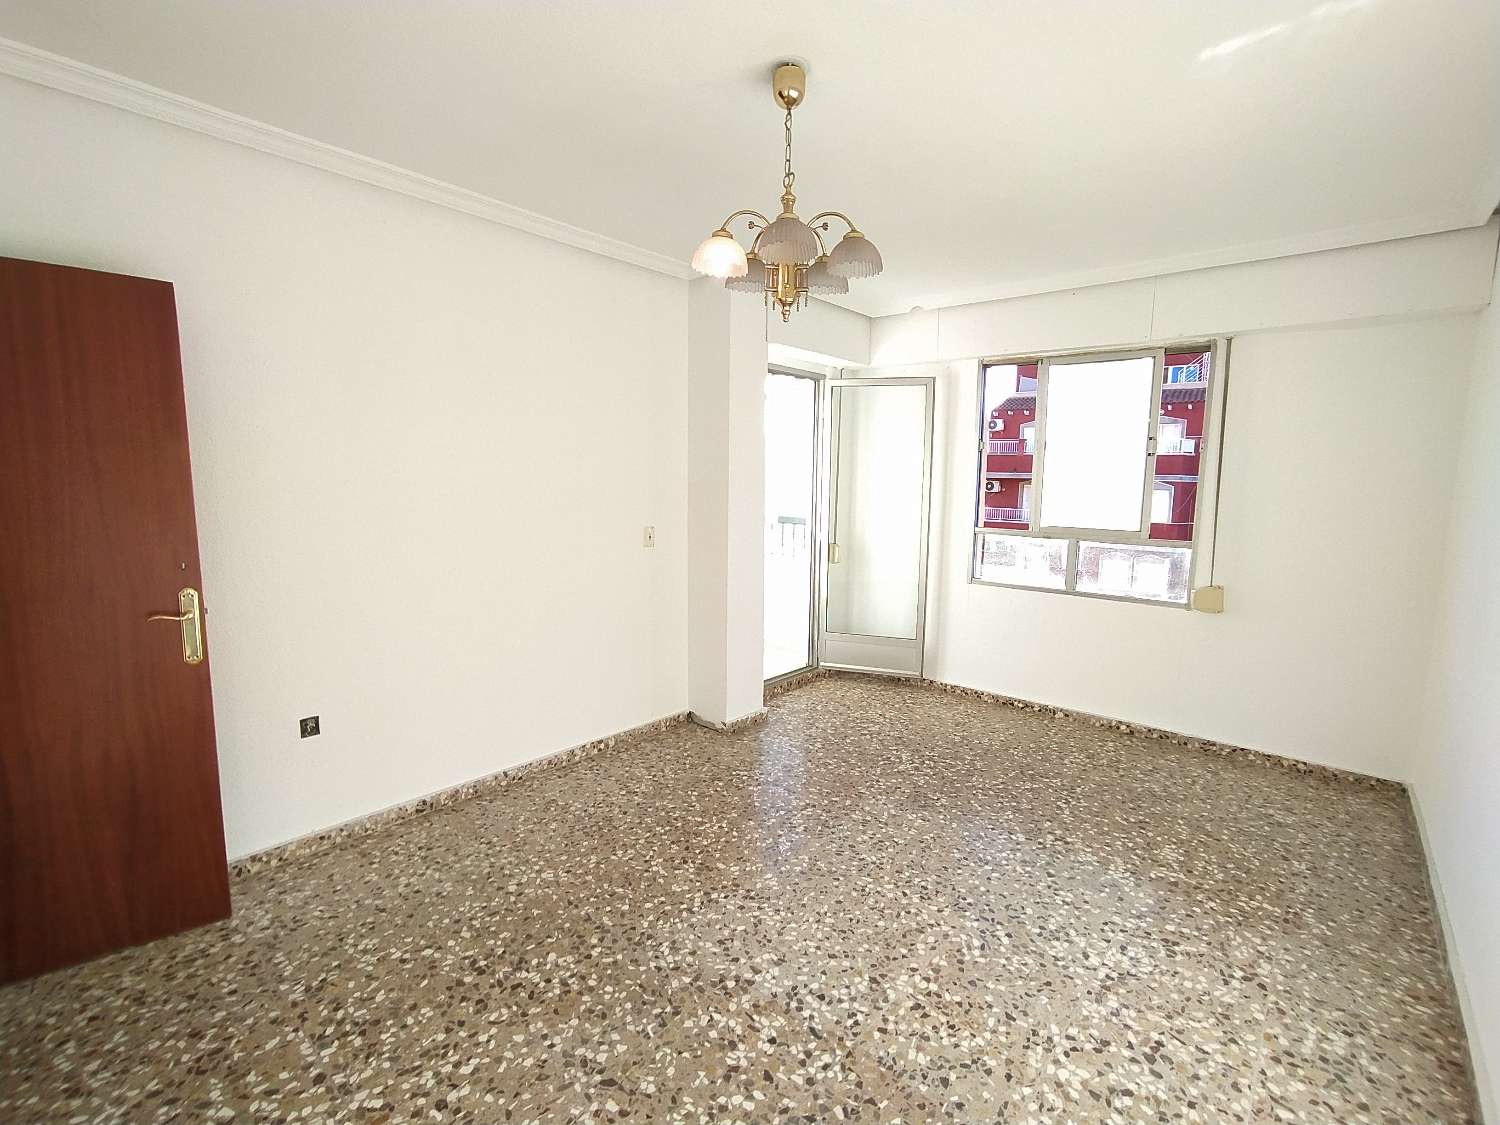 Great central apartment with 4 bedrooms